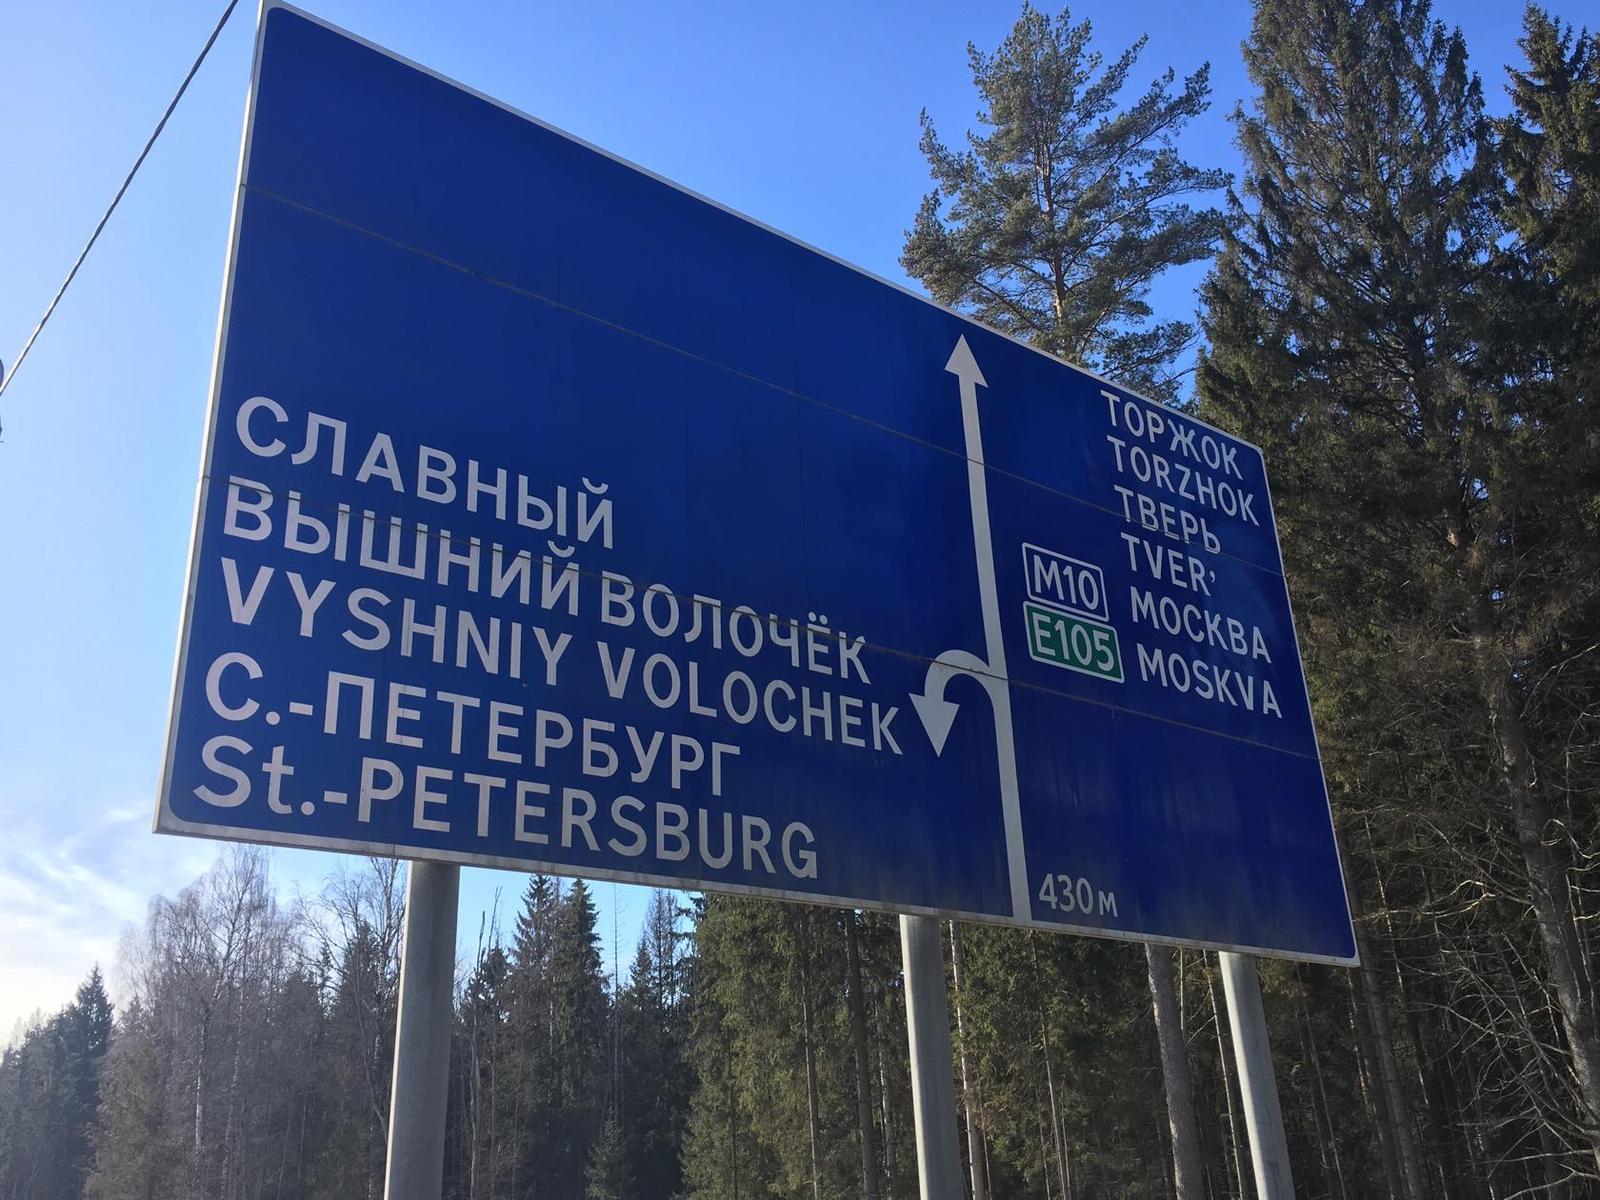 And Vyshny Volochek is still a glorious town - Signs, 